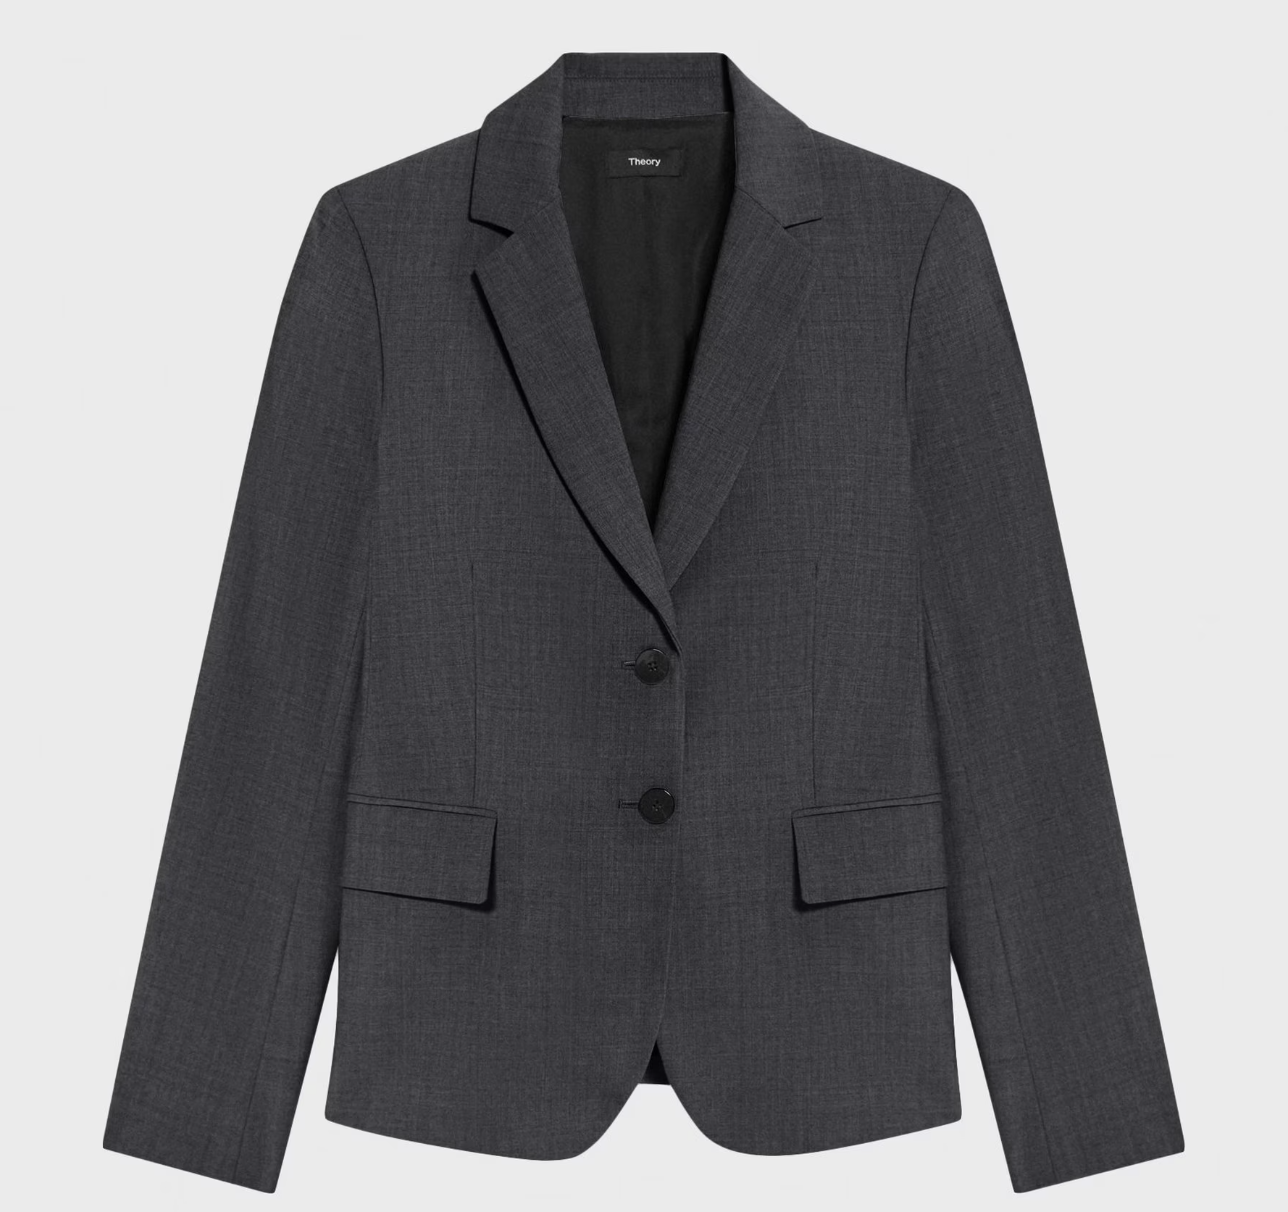 women's professional suit in charcoal